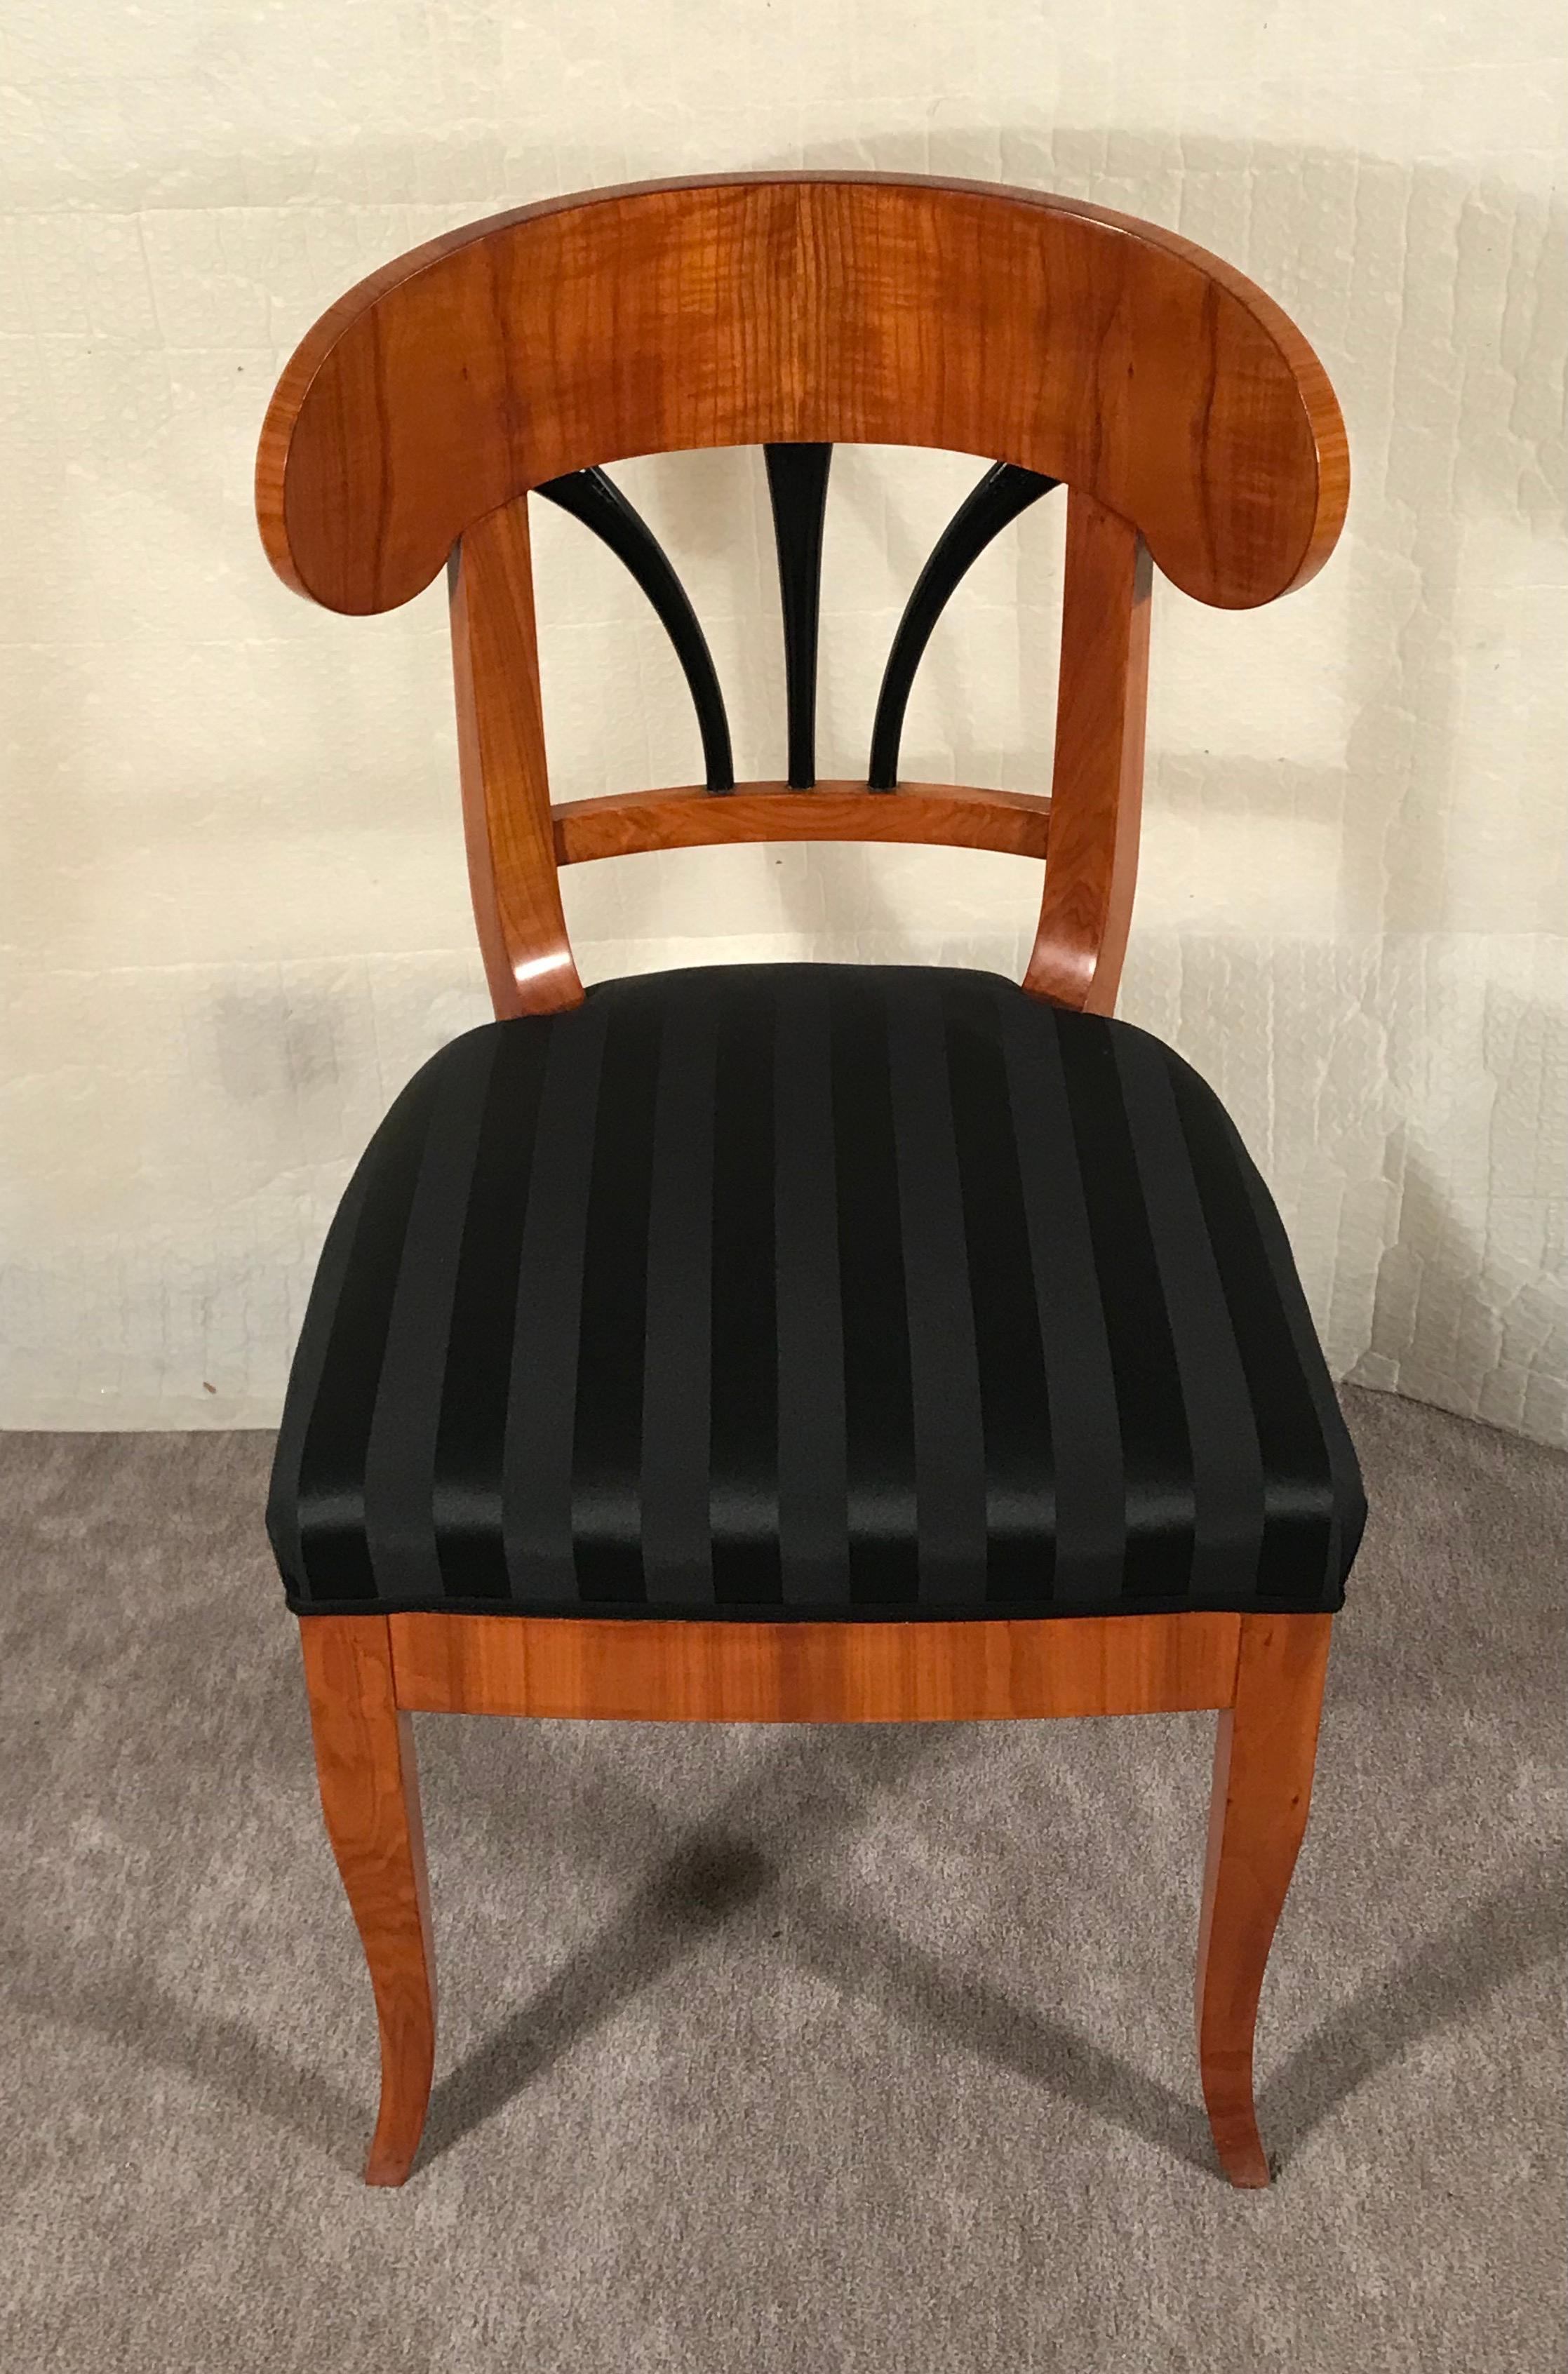 This unique Biedermeier chair dates back to 1820 and comes from Southern Germany. The pretty chair has a very nicely designed curved backrest with ebonized details. It has been expertly refinished, with a shellac hand polish. It comes with a new